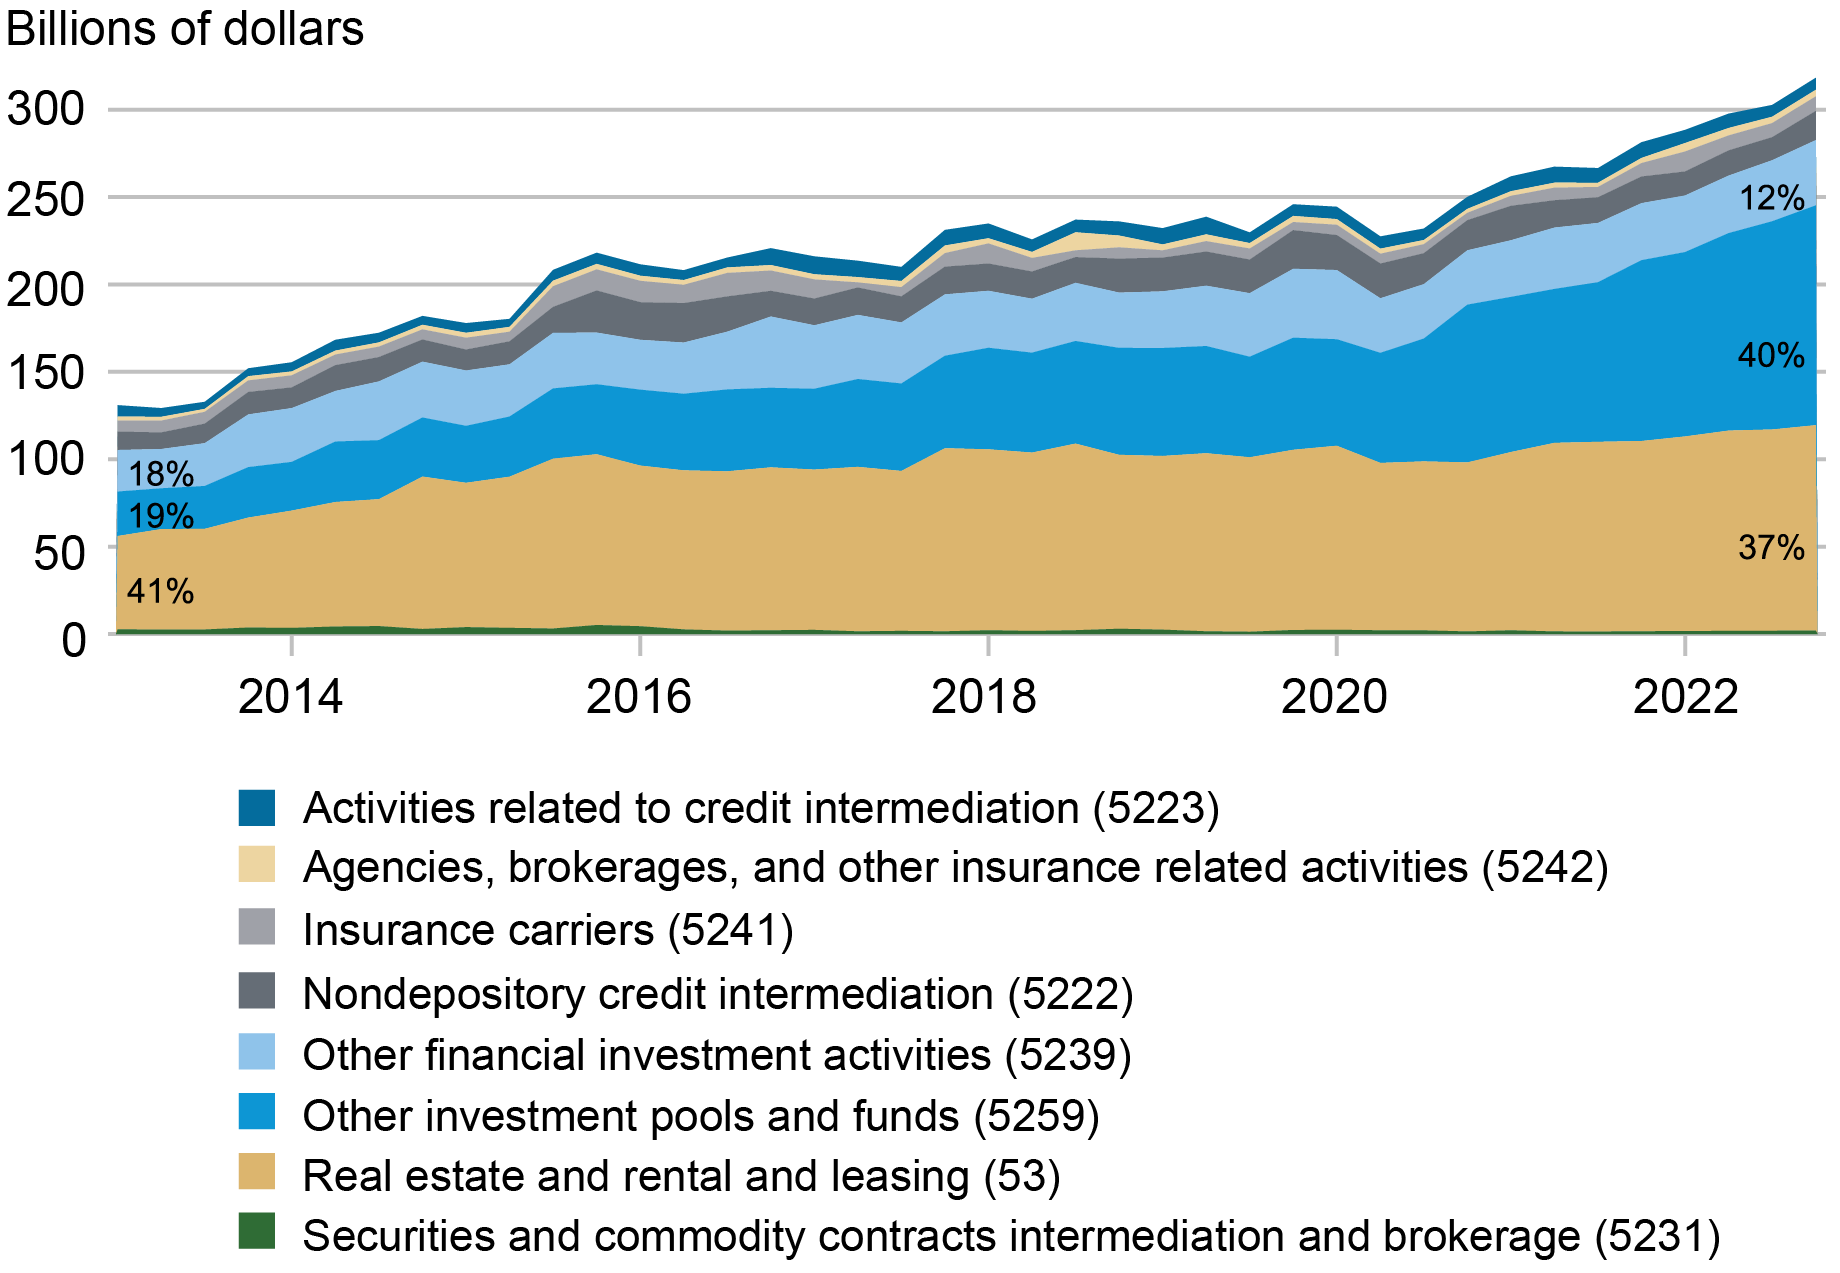 area chart tracking aggregate loans from the first quarter of 2013 to the first quarter of 2023 in billions of dollars from banks to NBFIs.